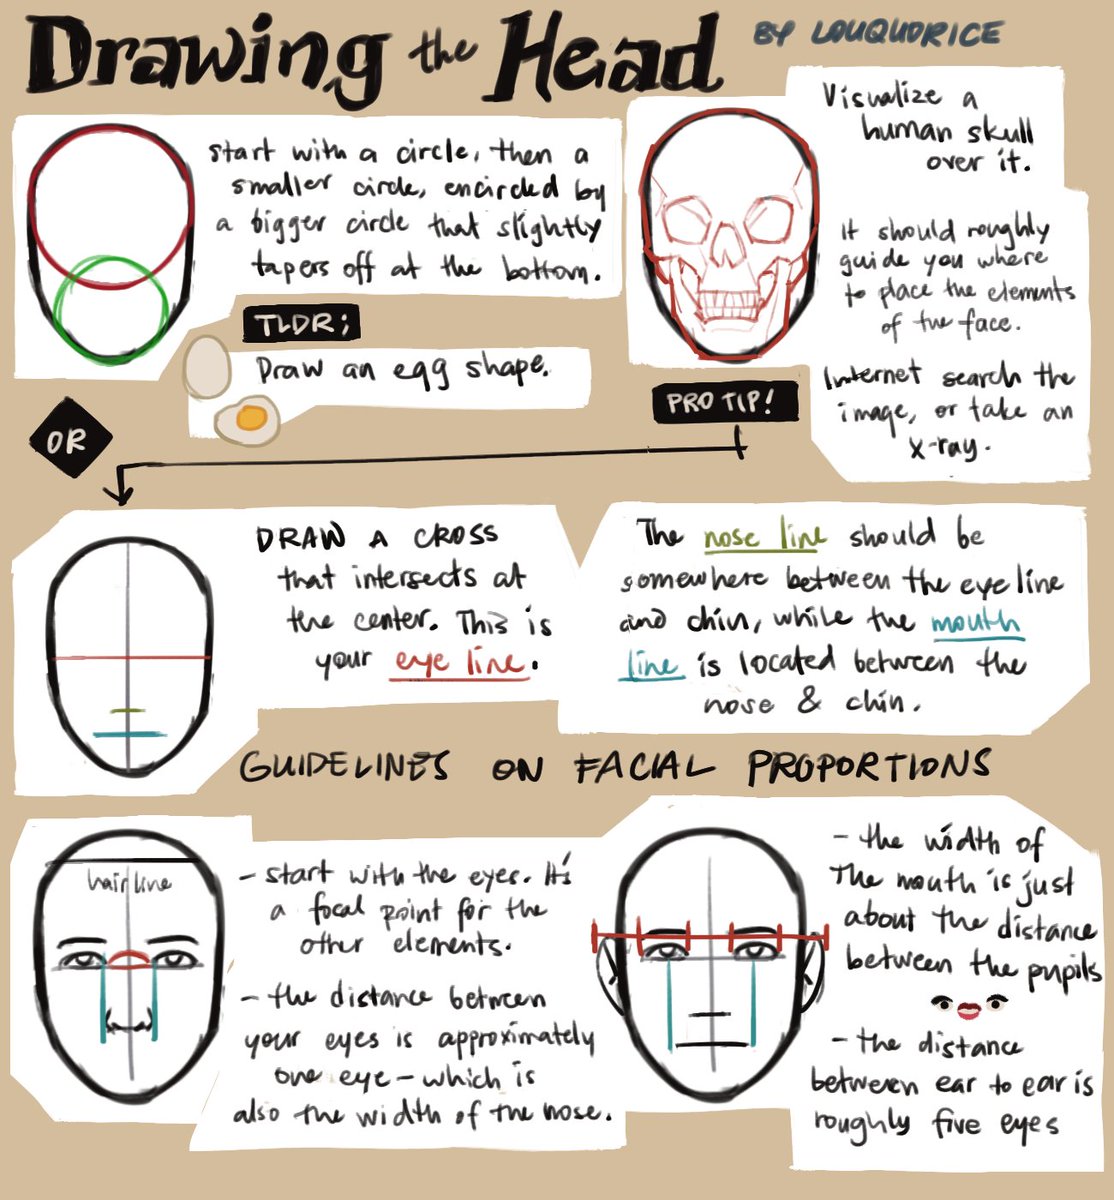 head #tutorial? more like a convoluted spell to turn yall into necromancers 💀 